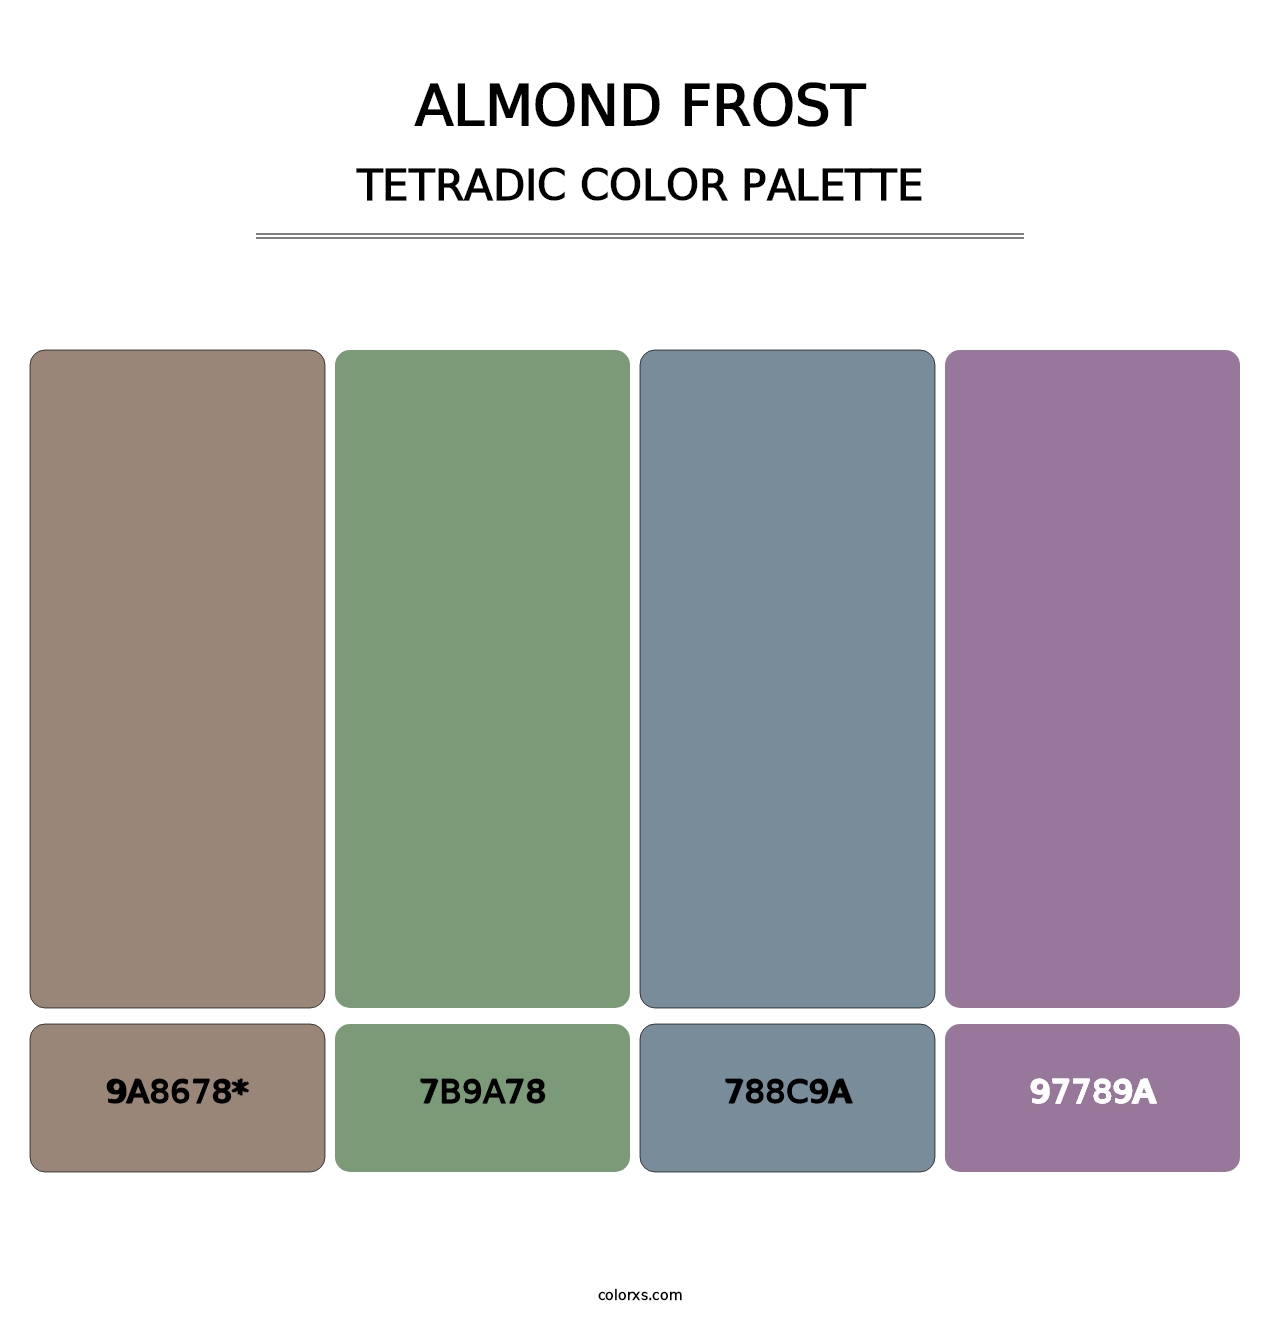 Almond Frost - Tetradic Color Palette